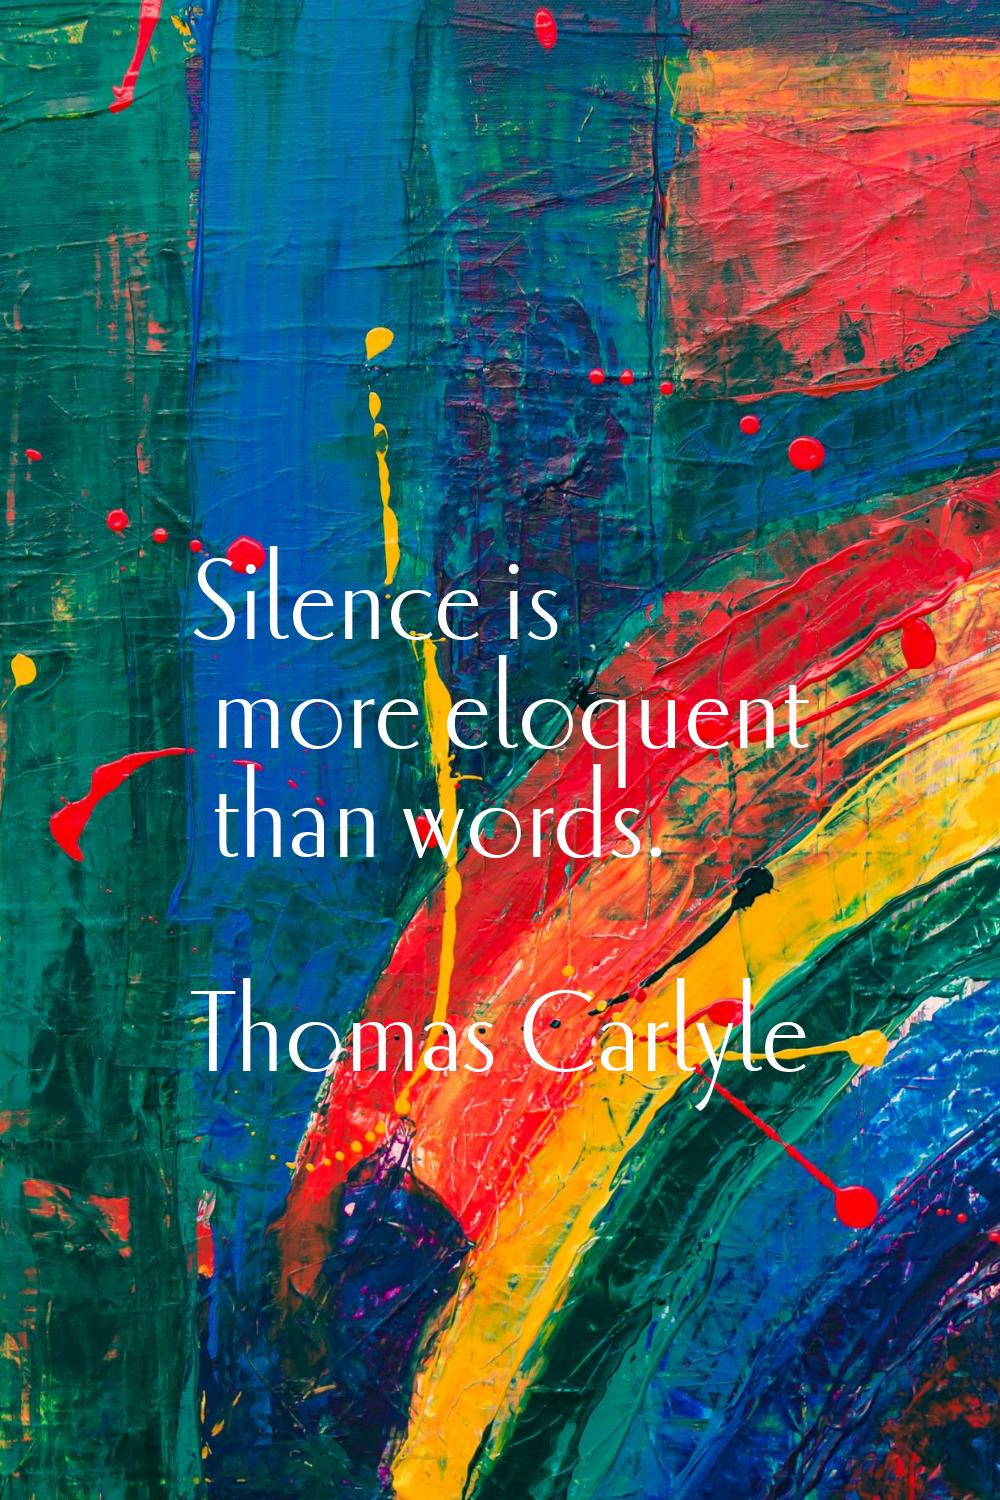 Silence is more eloquent than words.